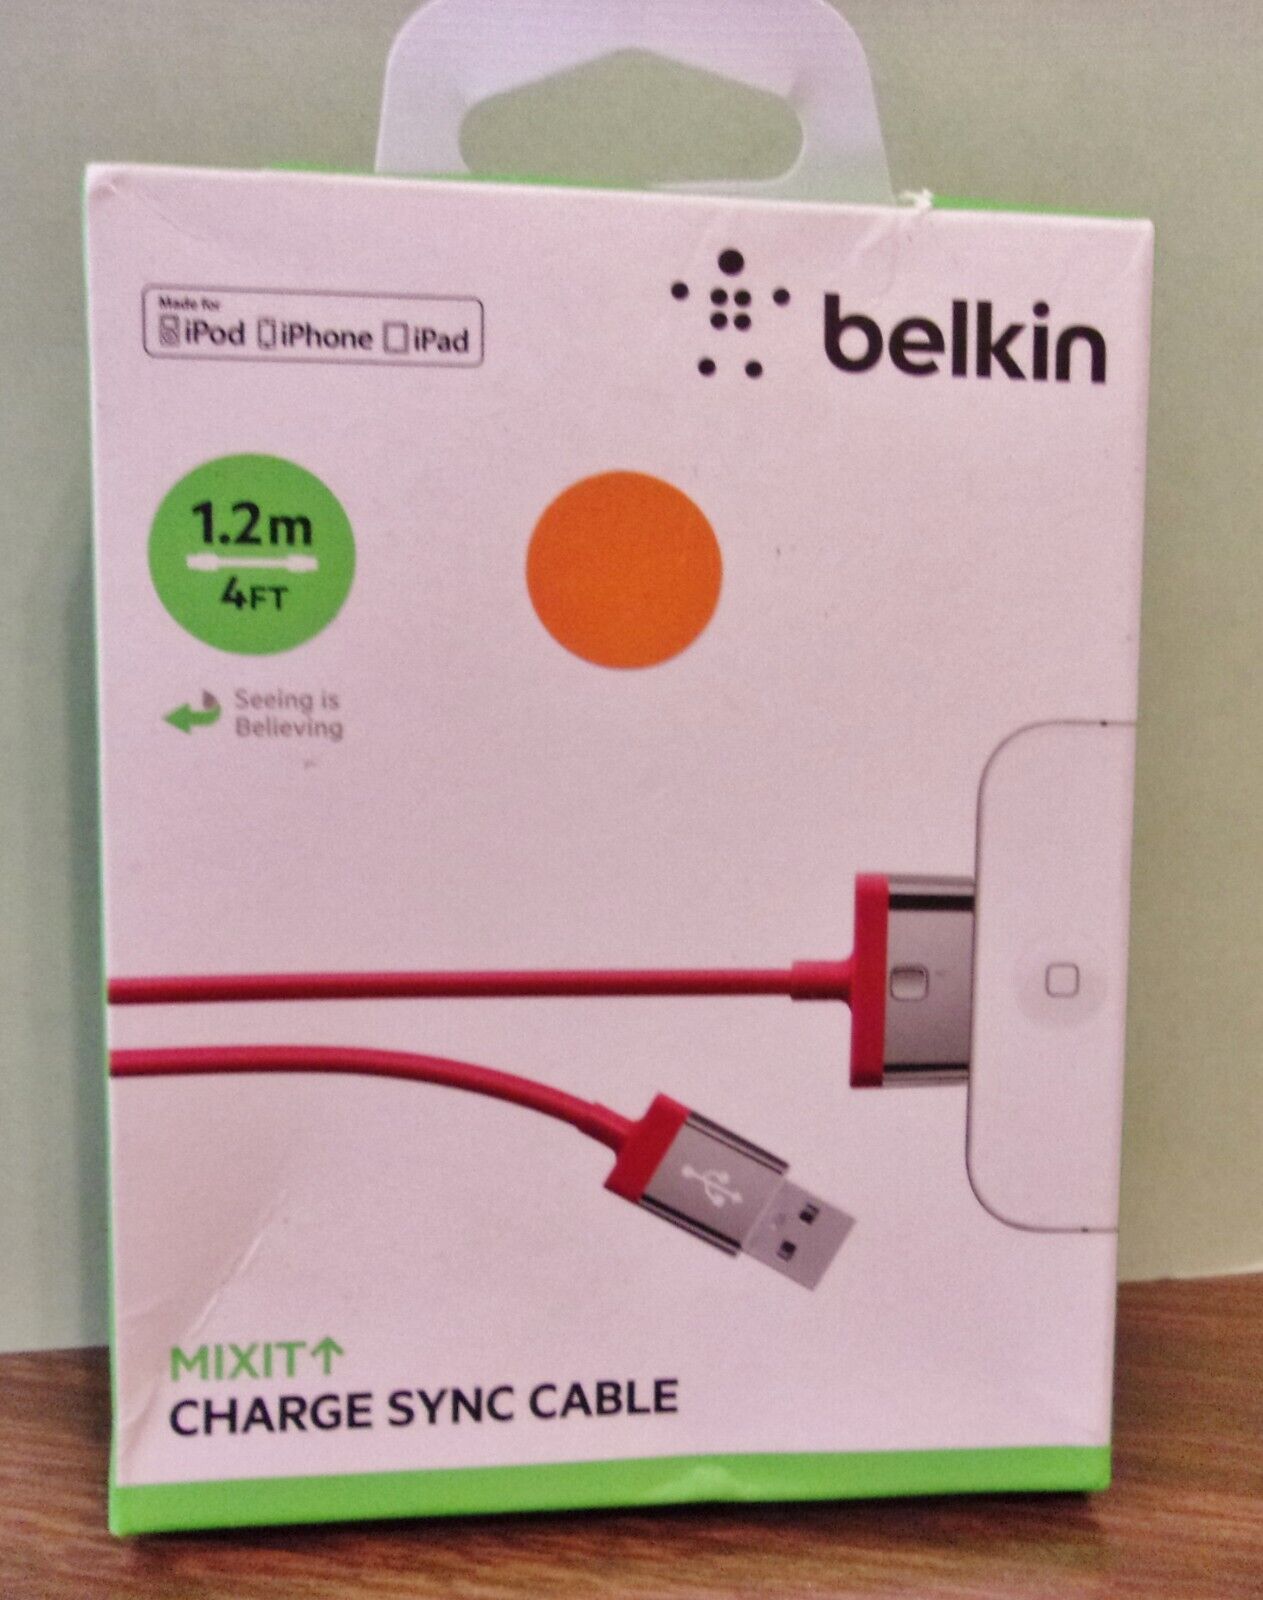 Belkin Mixit Charge Sync Cable 1.2m /4 ft RED (made for  iPod, iPhone, iPad) NEW